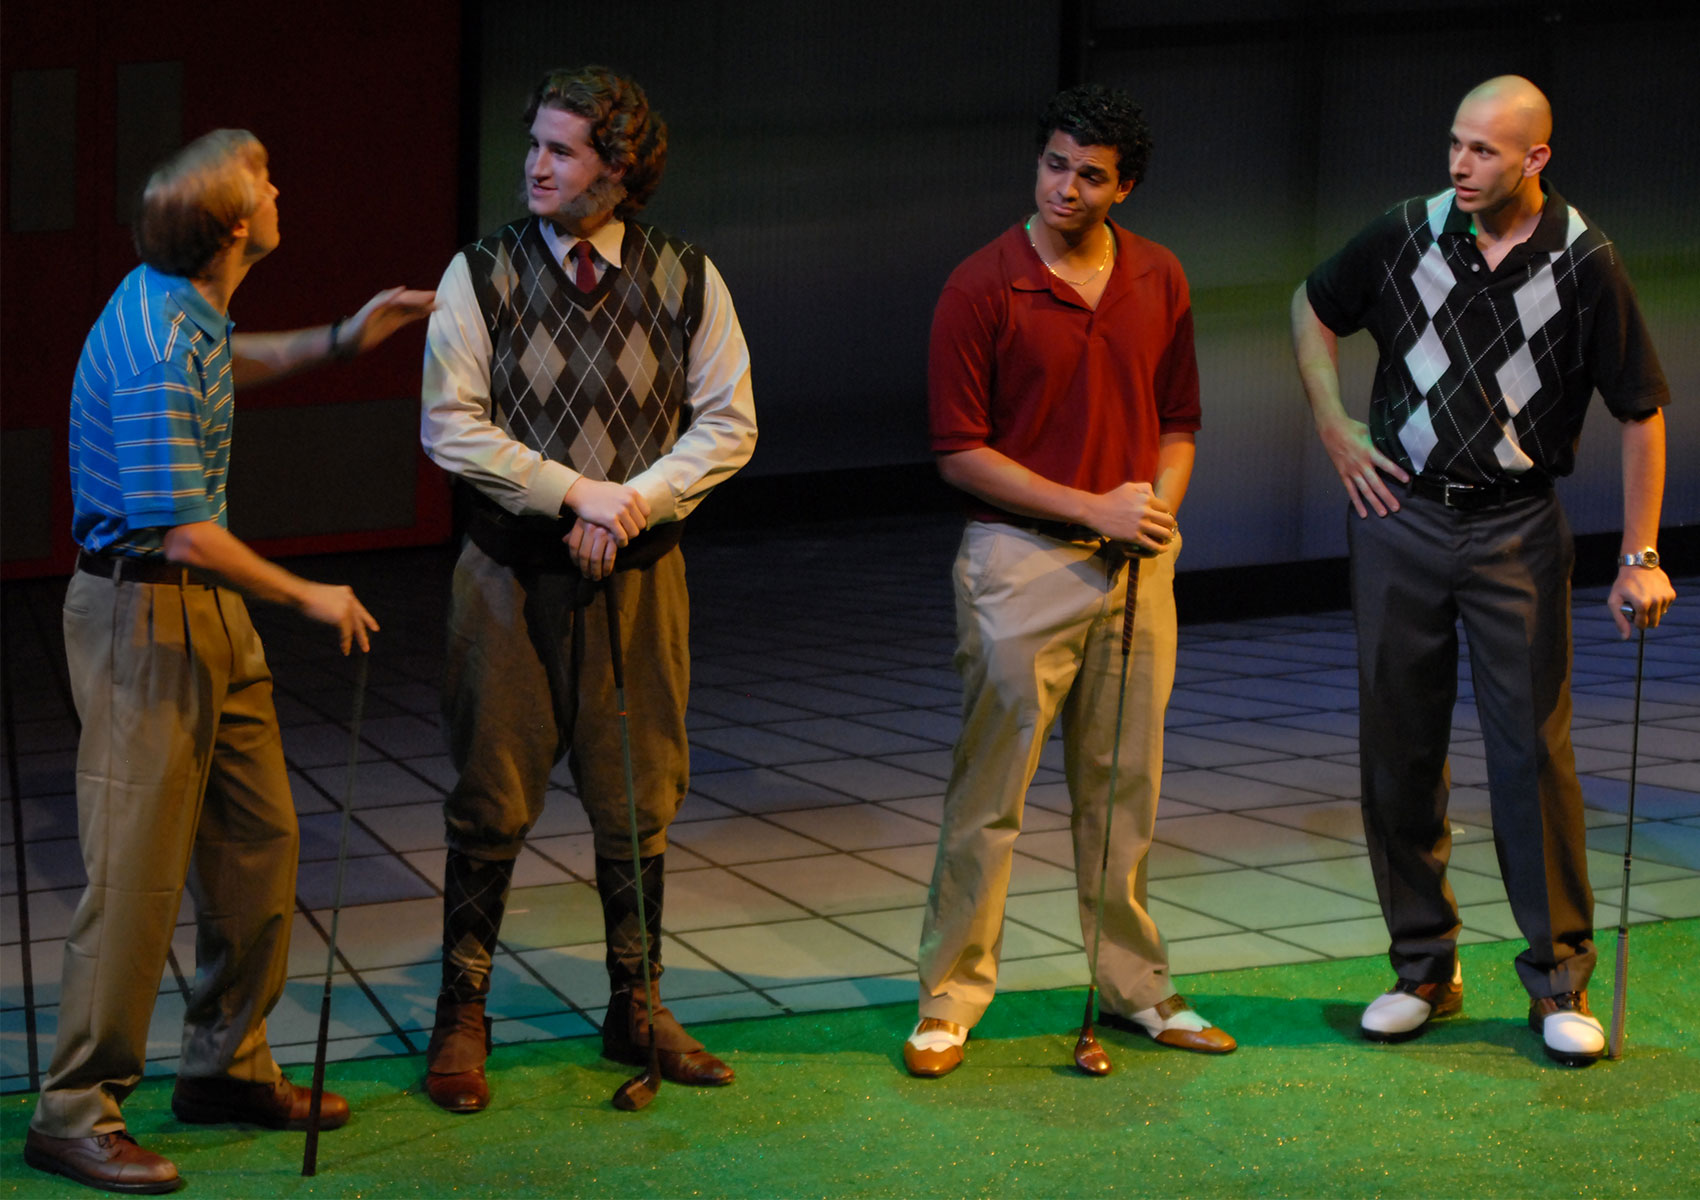 Four characters stand with clubs on a golf green, one at the far left is talking while the others listen.